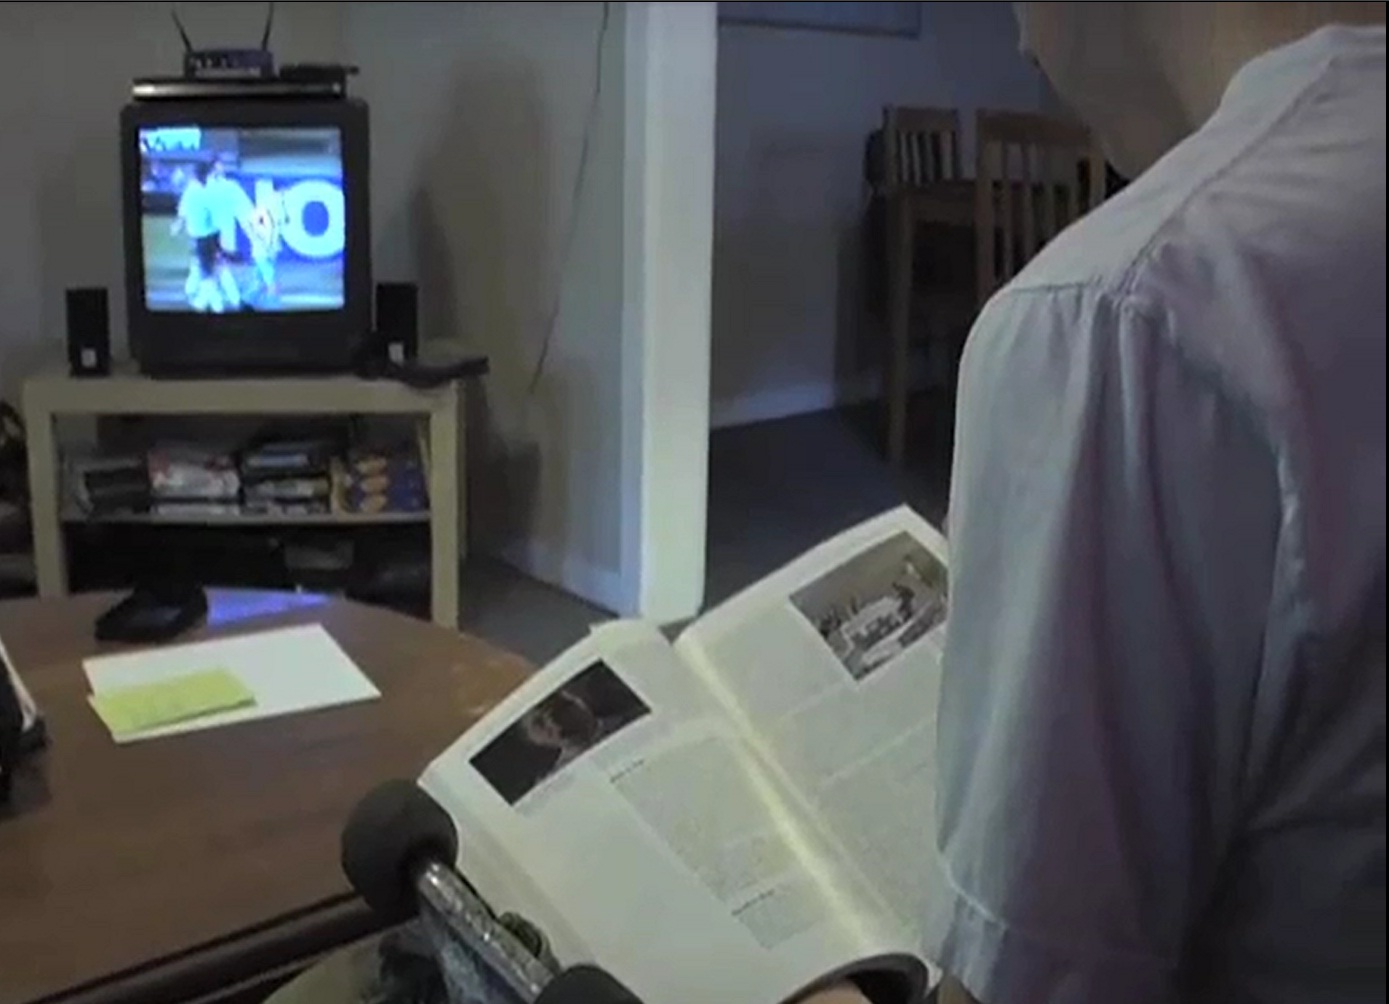 A student reading while watching television